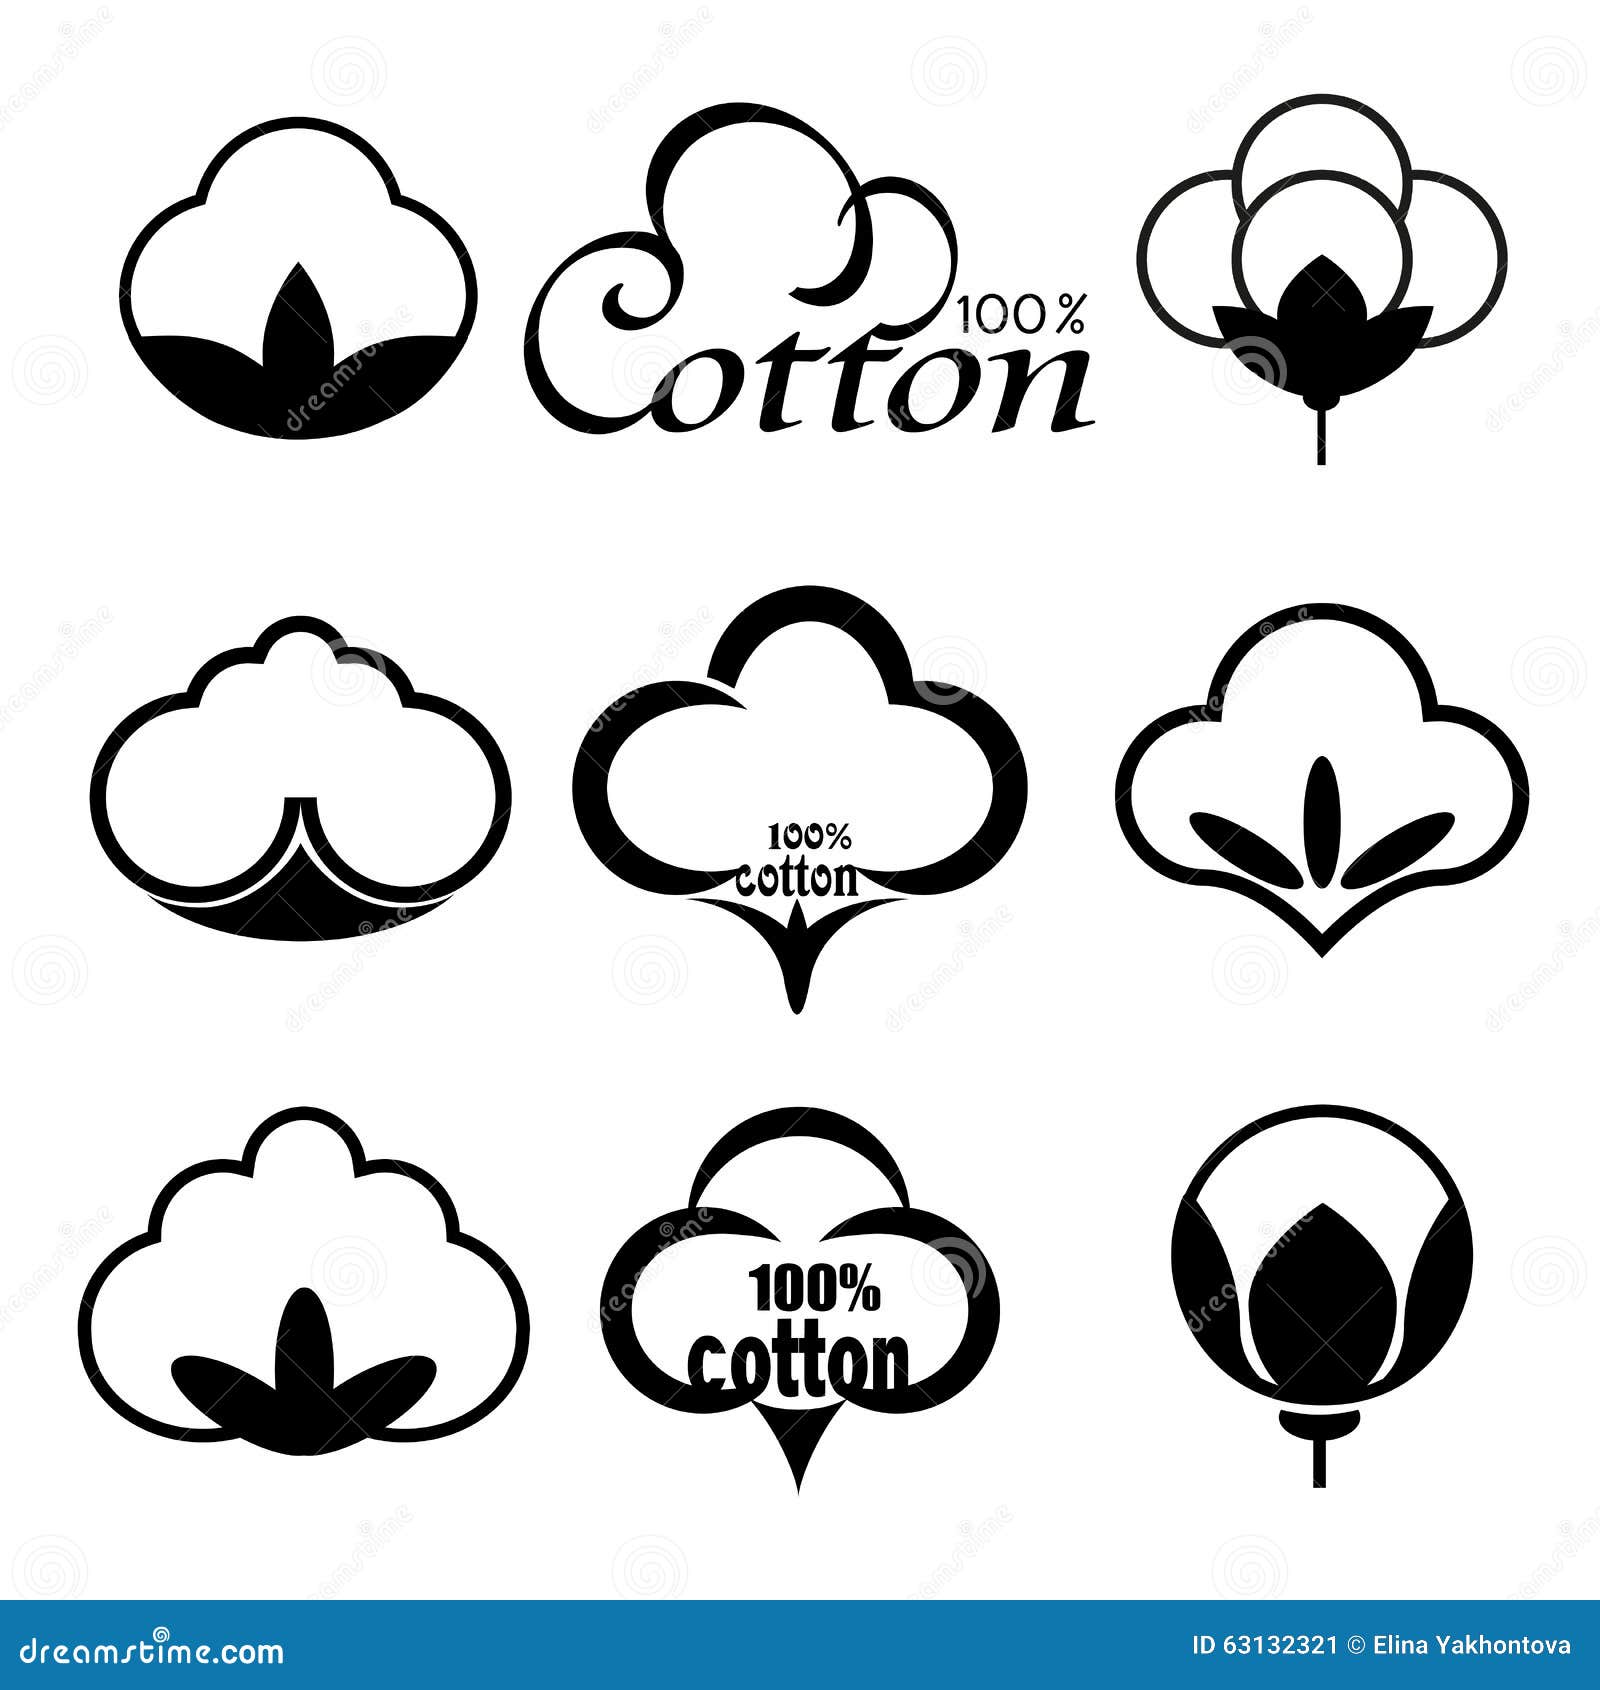 Vector Icons Set Indicating the Cotton Mark or Textile Products on ...